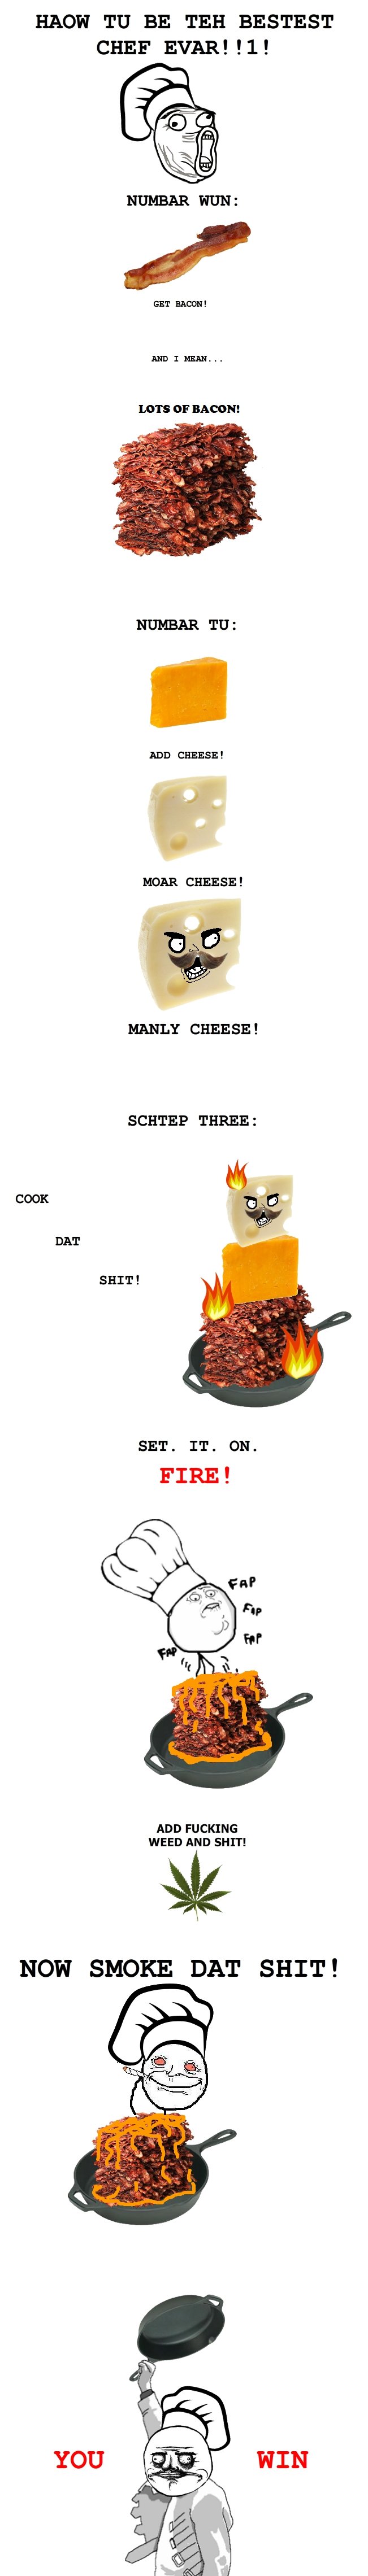 How tu be teh chef. OC By me . HAOW TU BE TEH BESTEST CHEF EVE! !1! AND Amun_. ADD CHEESE l MANLY CHEESE! SCHLEP THREE: COOK SHIT! SET. IT. on FIRE! NOW SMOKE D